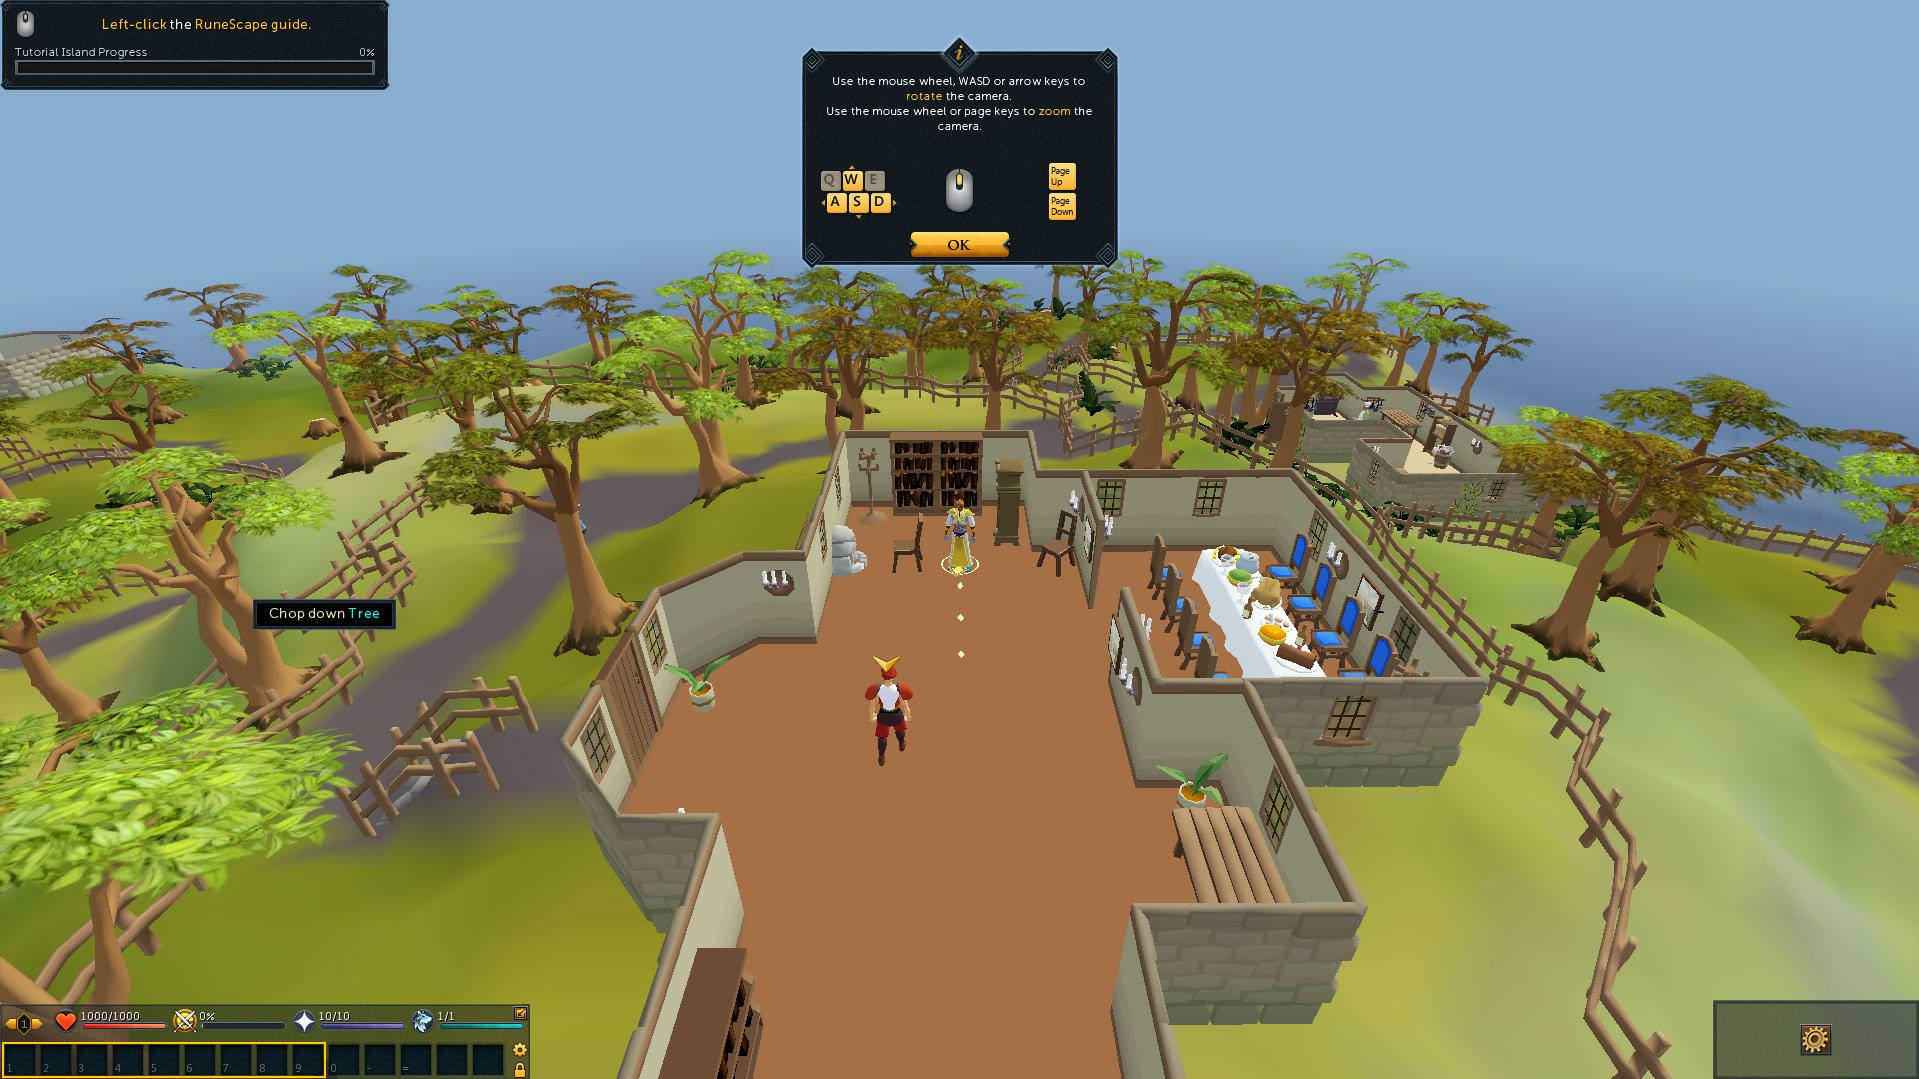 Online Marketplace Guide For Buying Runescape Gold